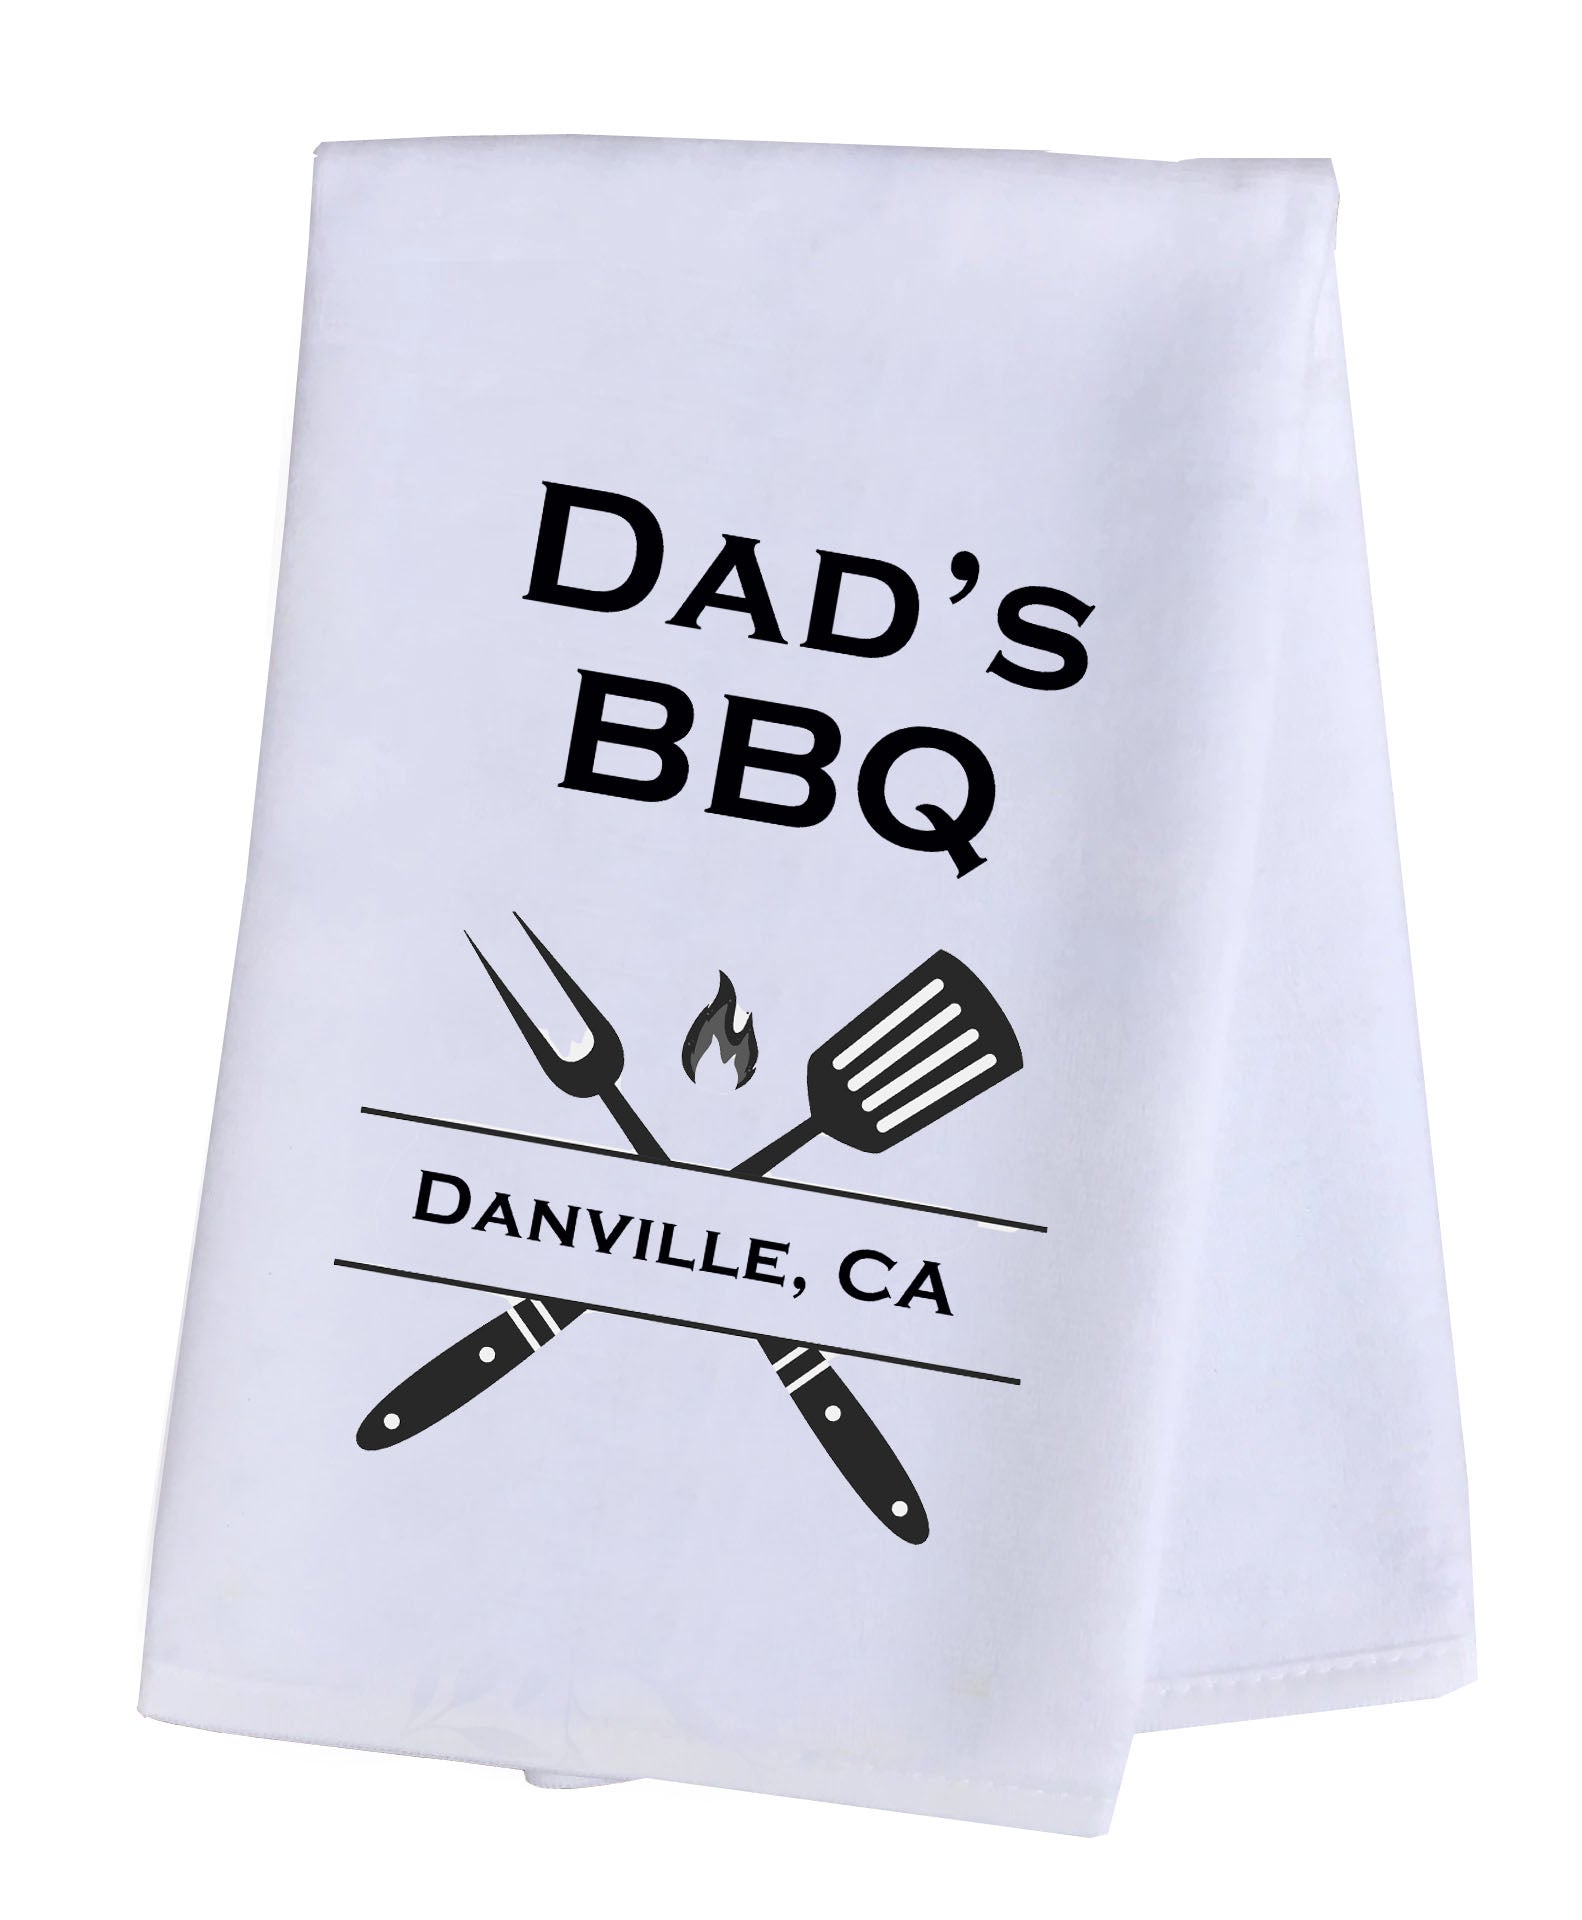 Hand Towel Plush Personalized - Dad's BBQ with Your Choice of Location